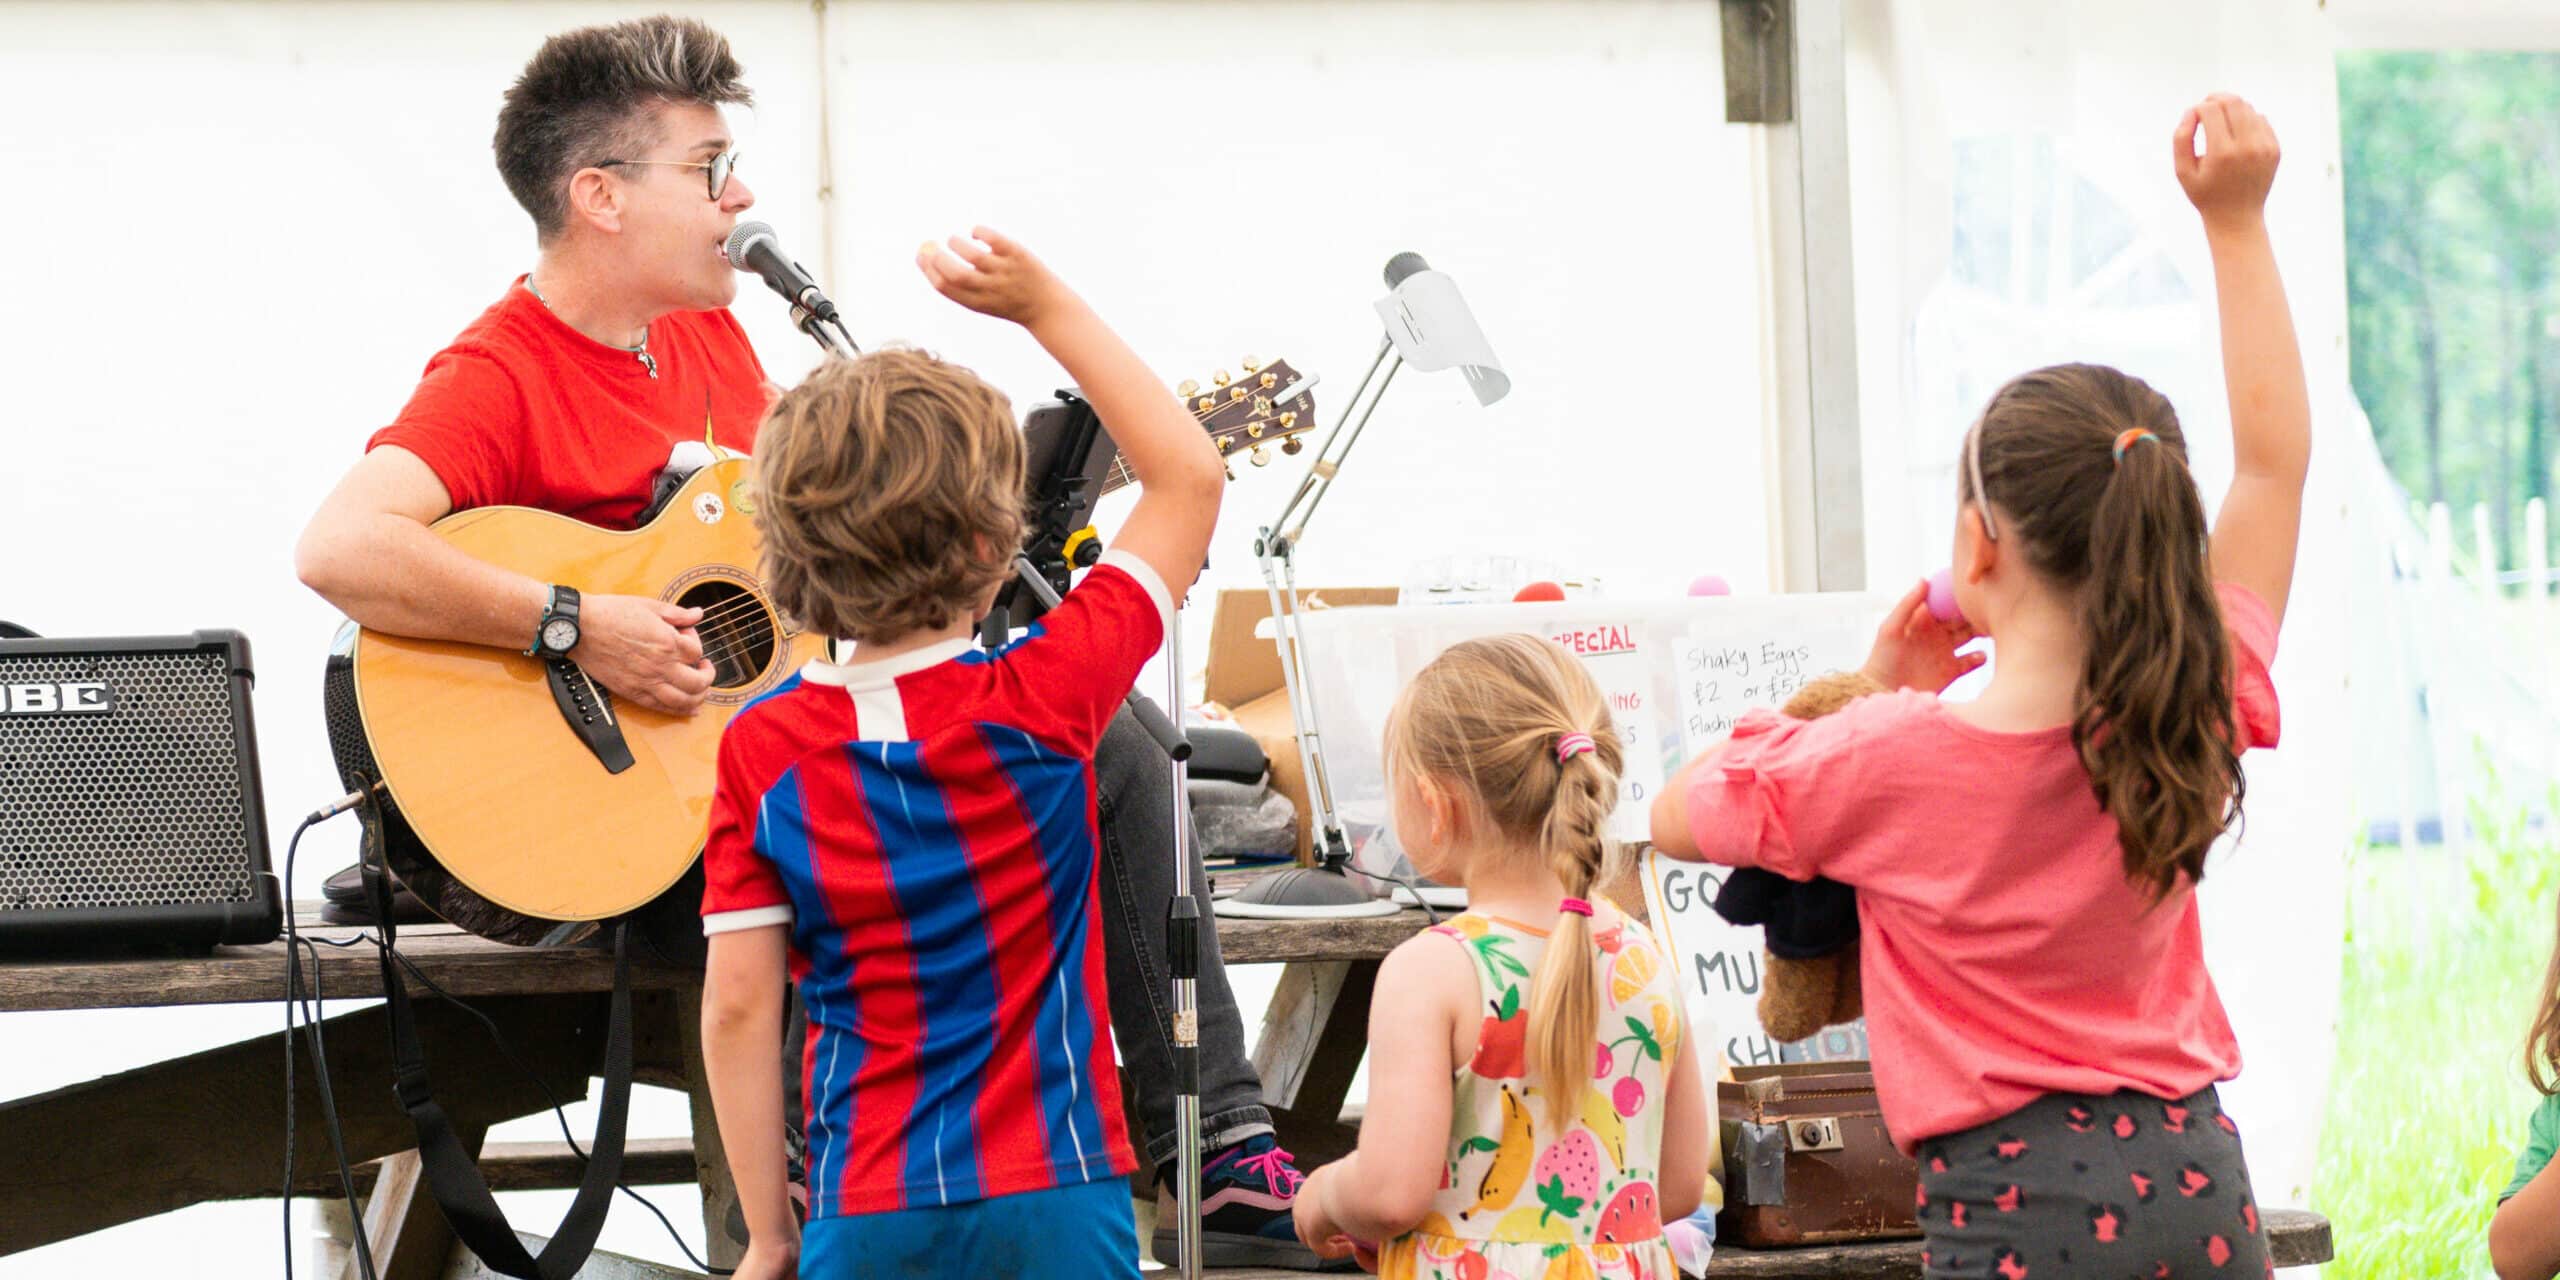 go kids music school acmping glamping sussex